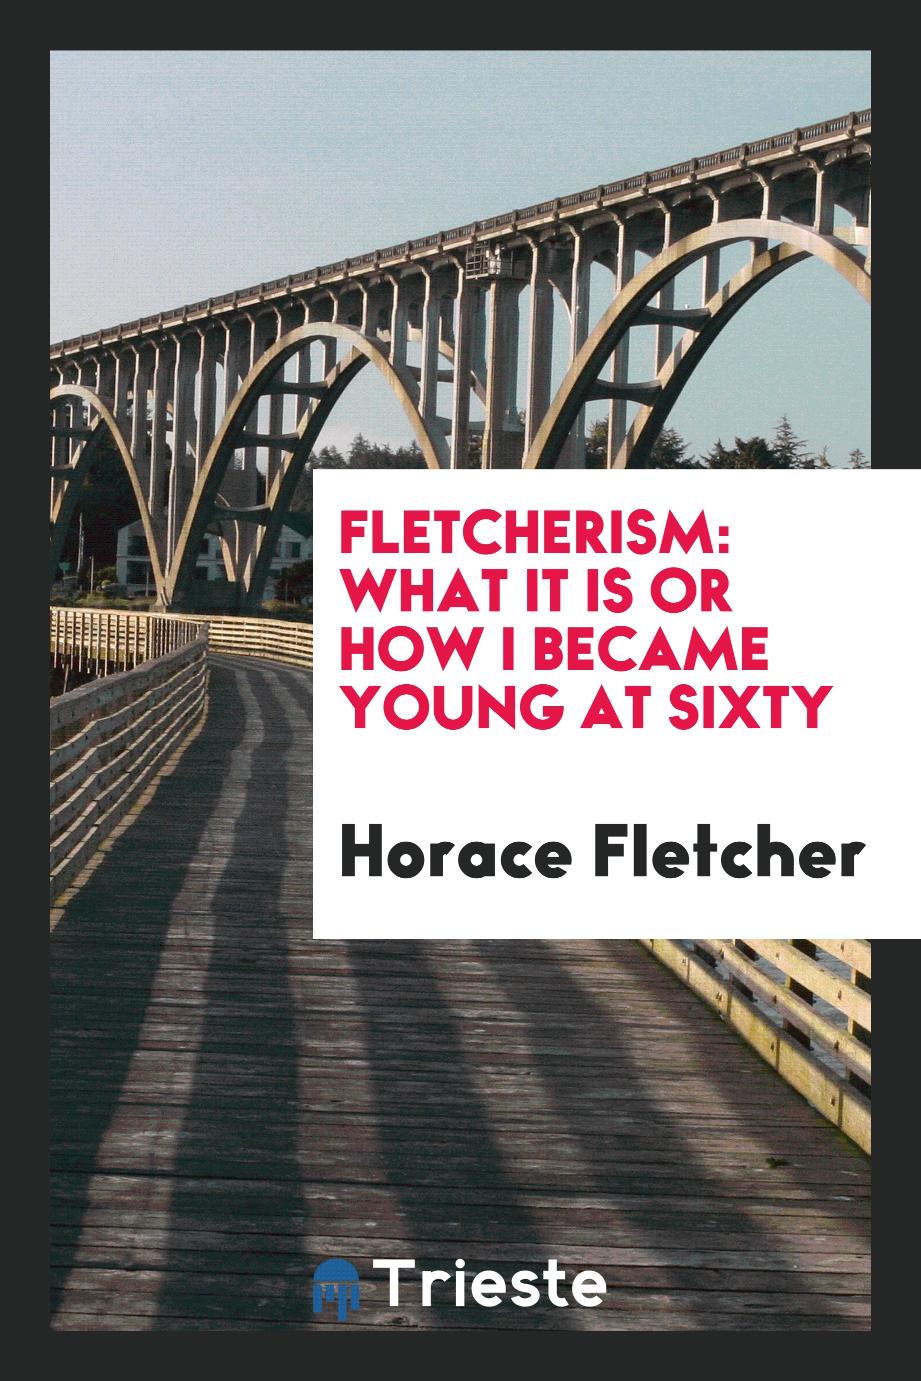 Fletcherism: what it is or how I became Young at sixty